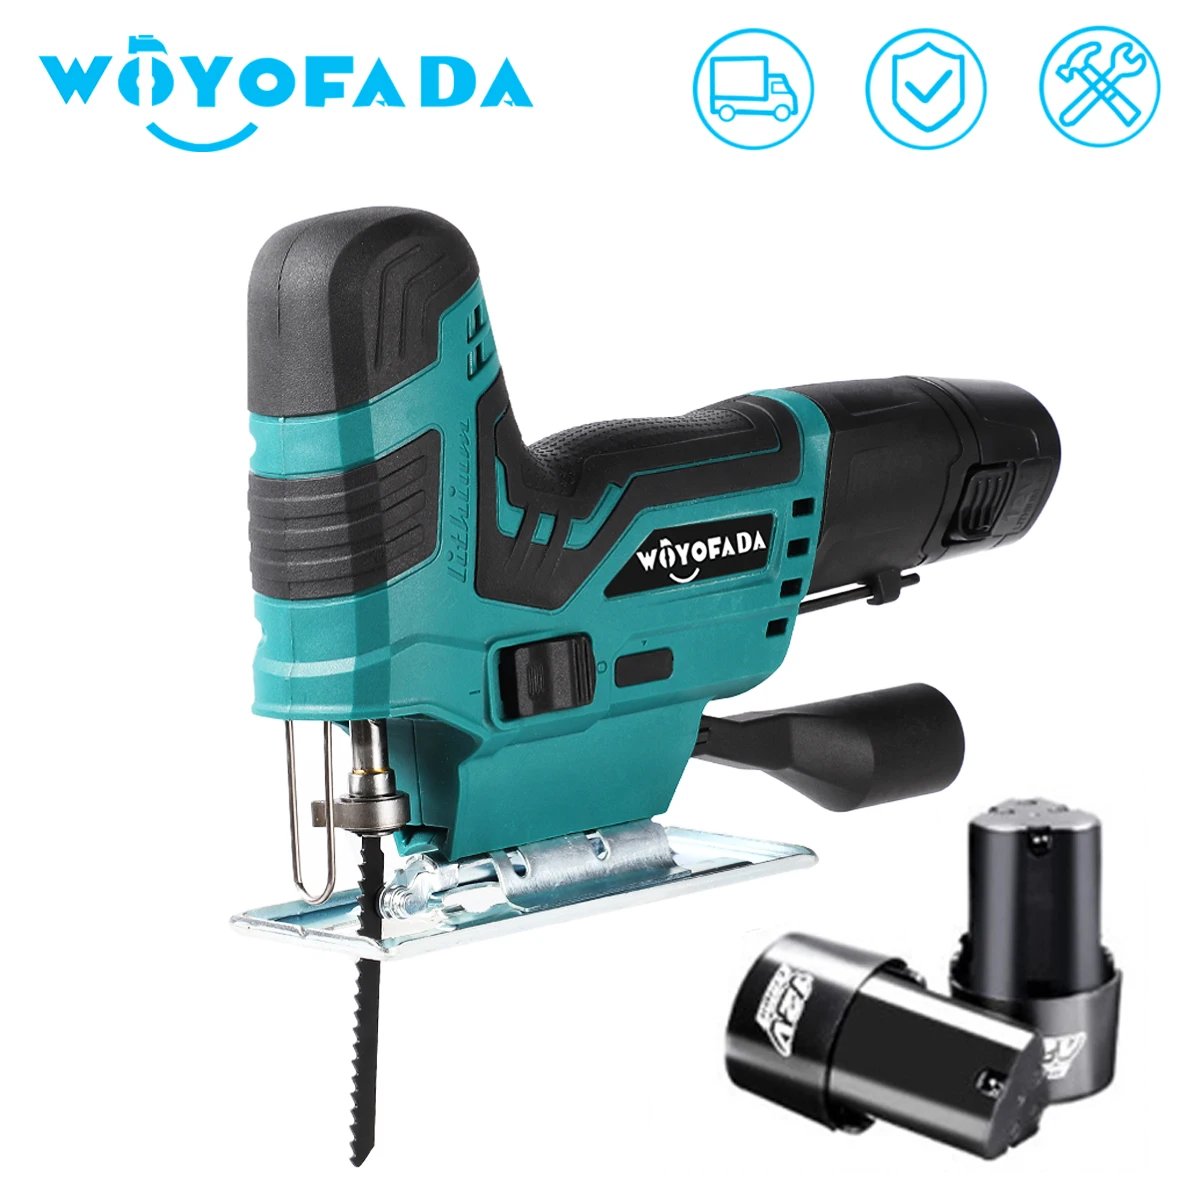 

12V Cordless Jig Saw Portable Electric Jigsaw Rechargeable Mini Logging Saw Wood Cutting Portable Woodworking With Battery